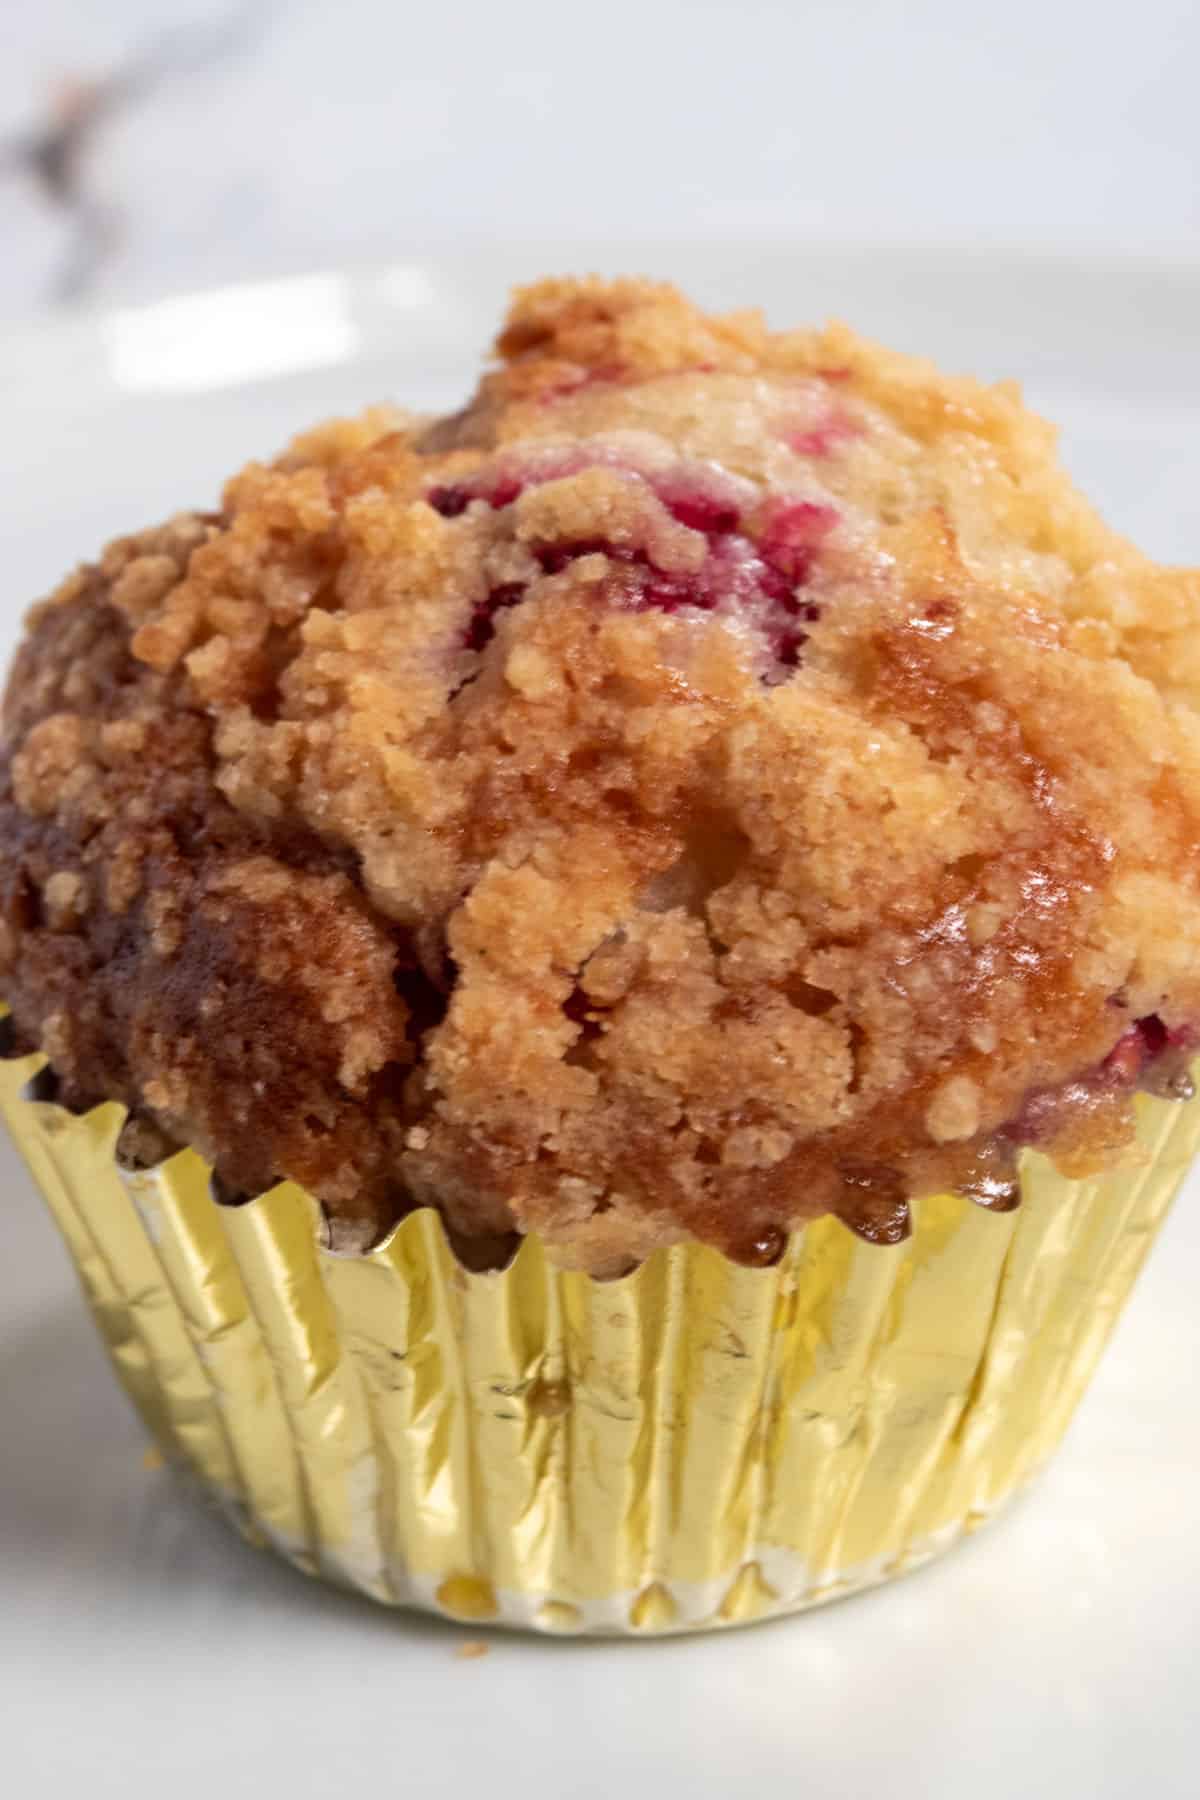 A single muffin inside a shiny golden cupcake liner. This one is erupting with hot raspberries on top. 